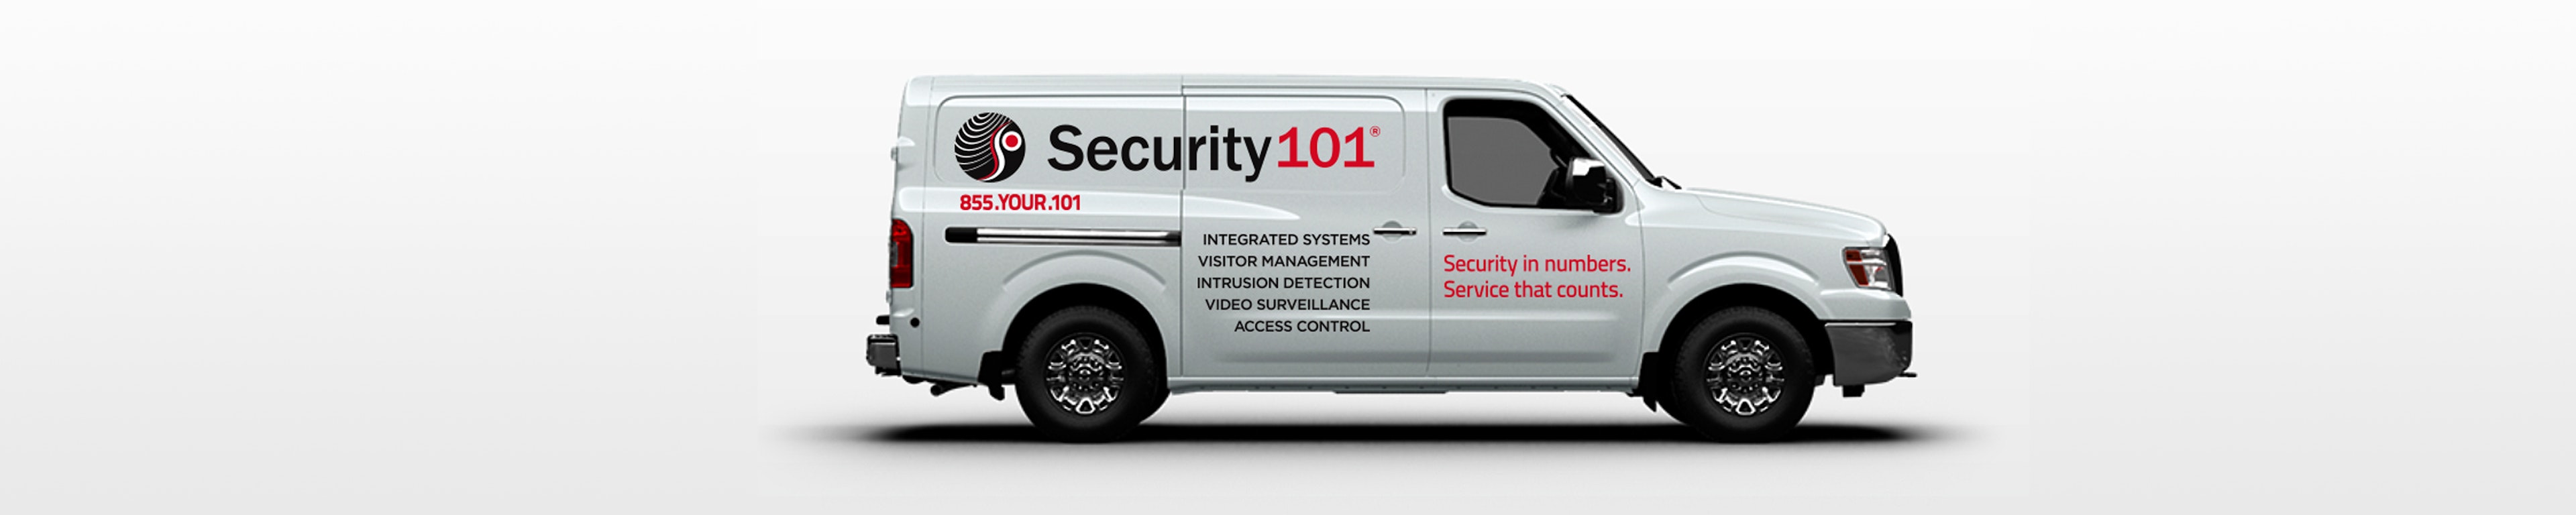 security101 nissan banner